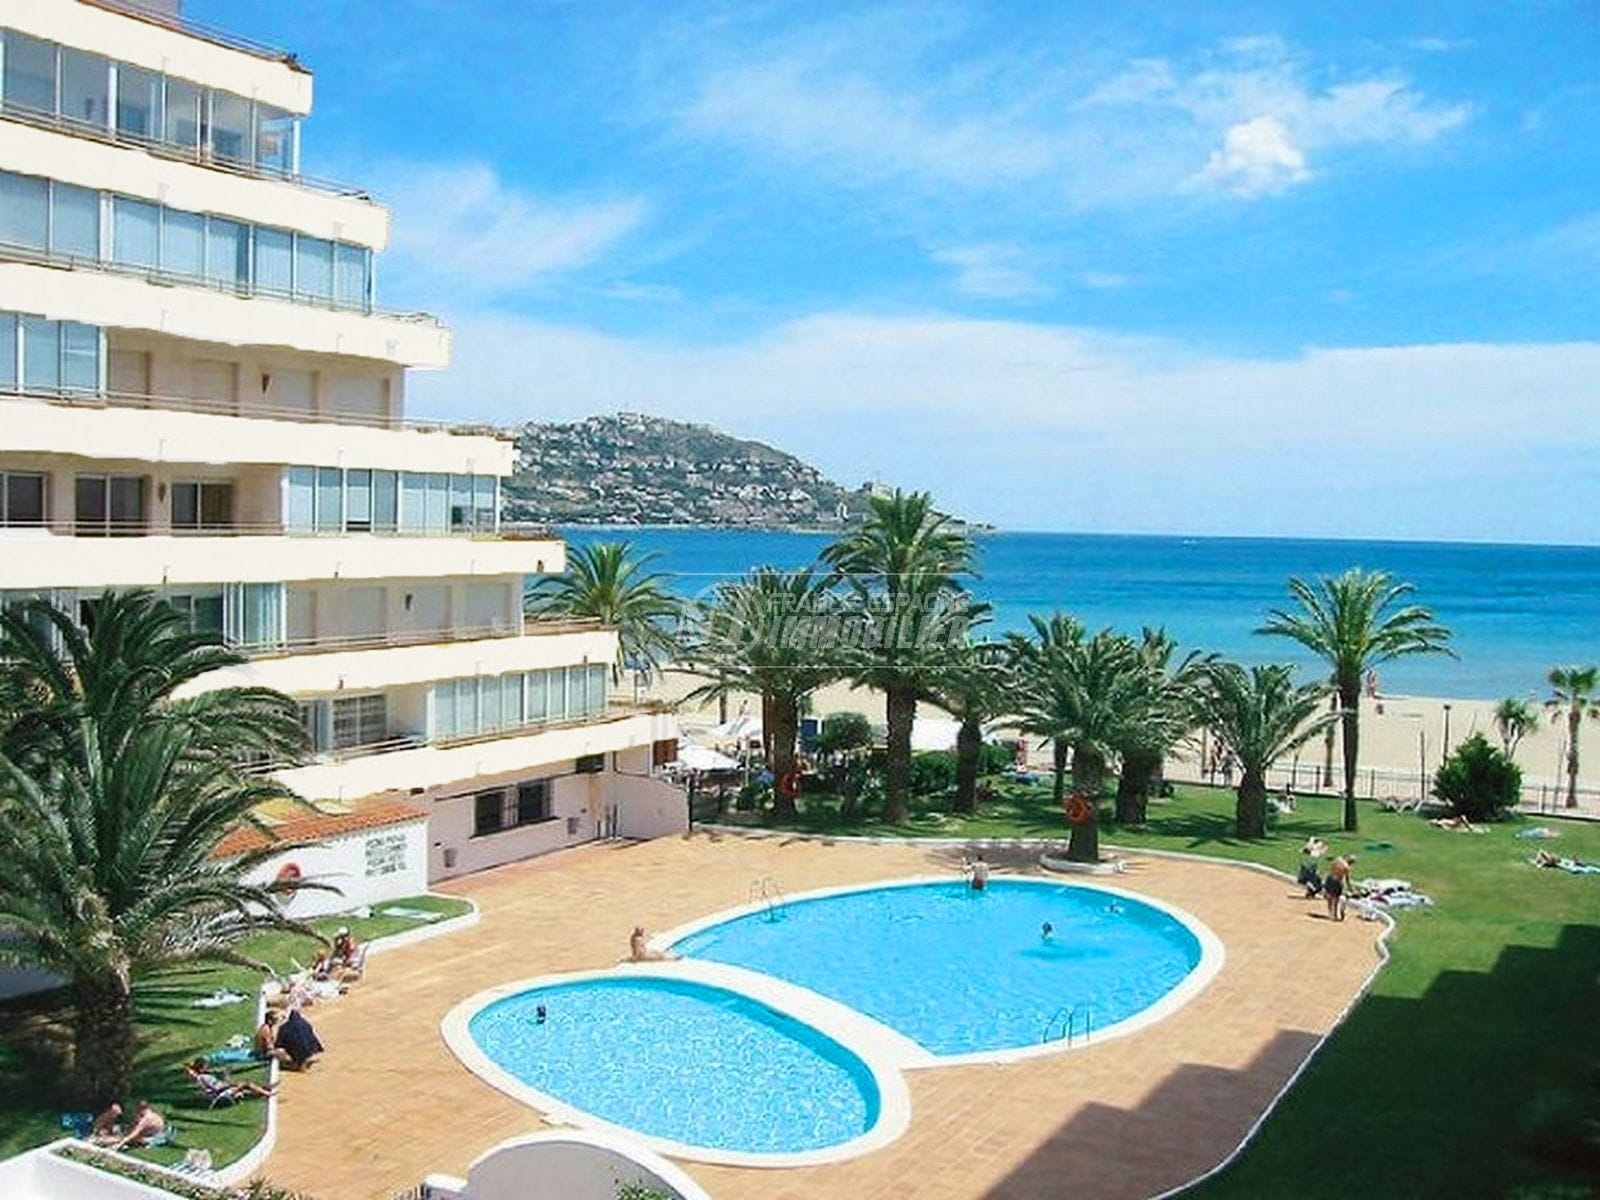 Exclusivite Roses - 2 bedroom apartment, 1st line direct beach access